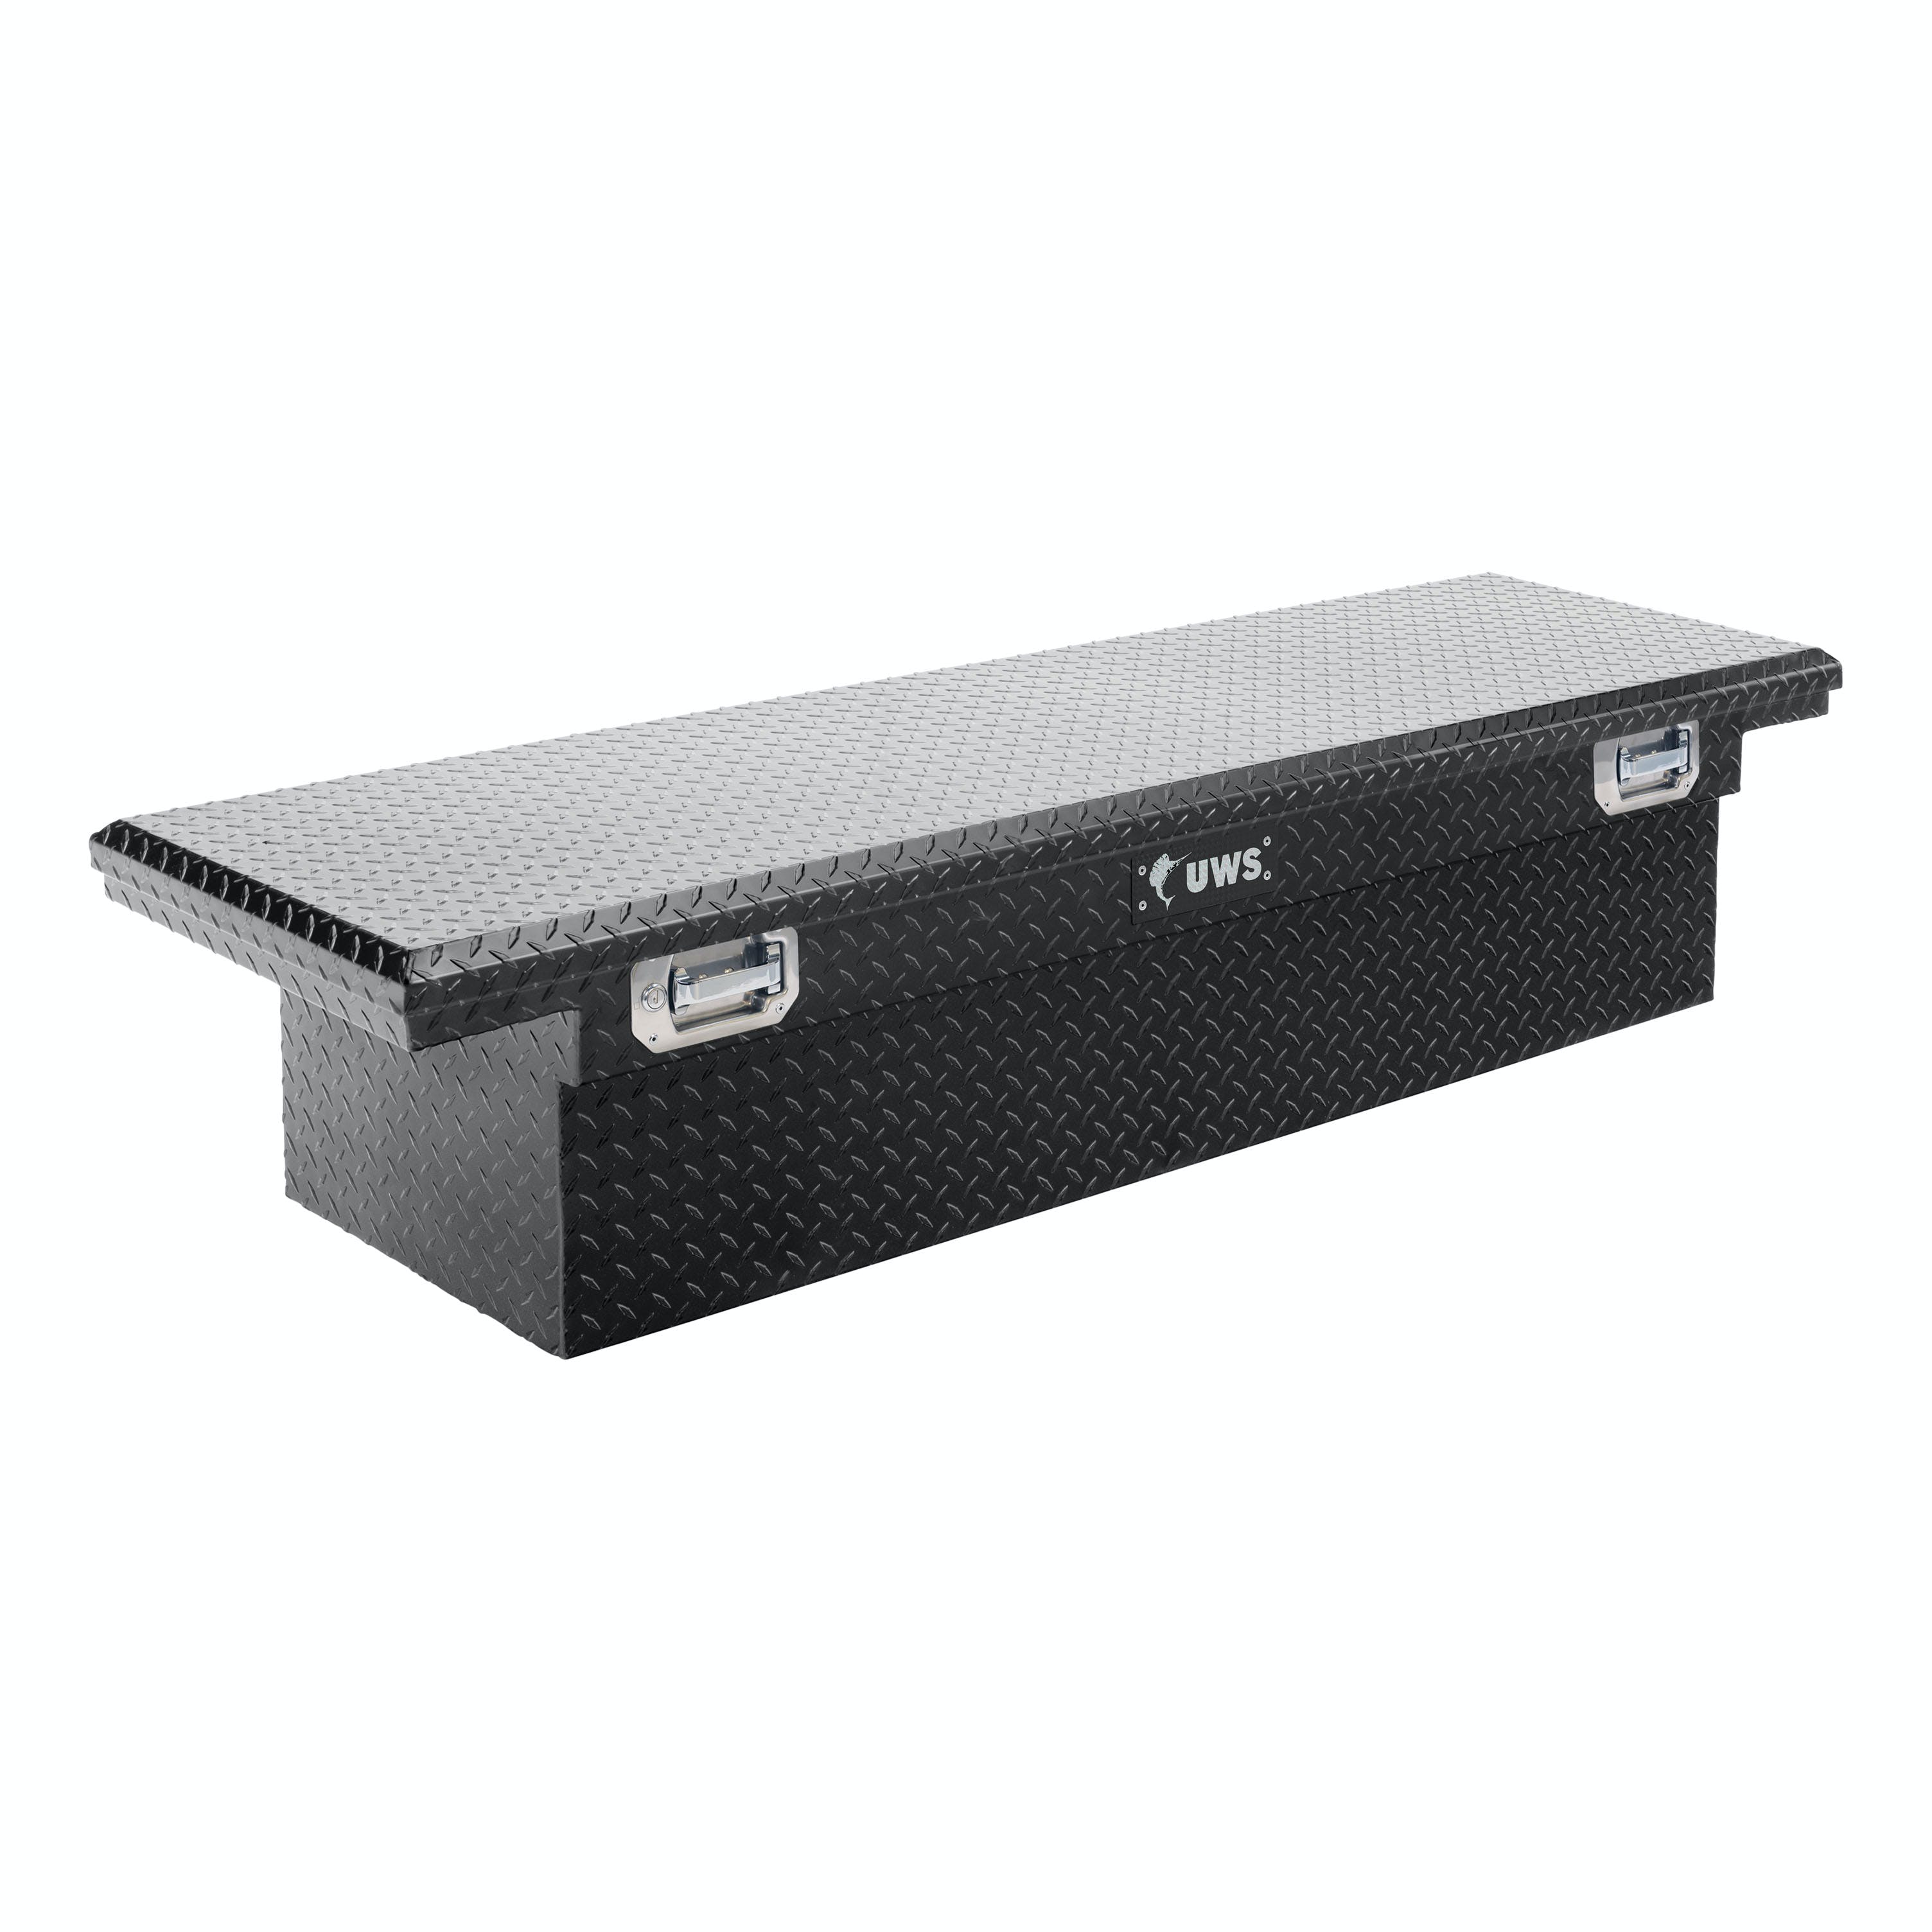 UWS EC10492 69 in. Crossover Low Profile Truck Tool Box